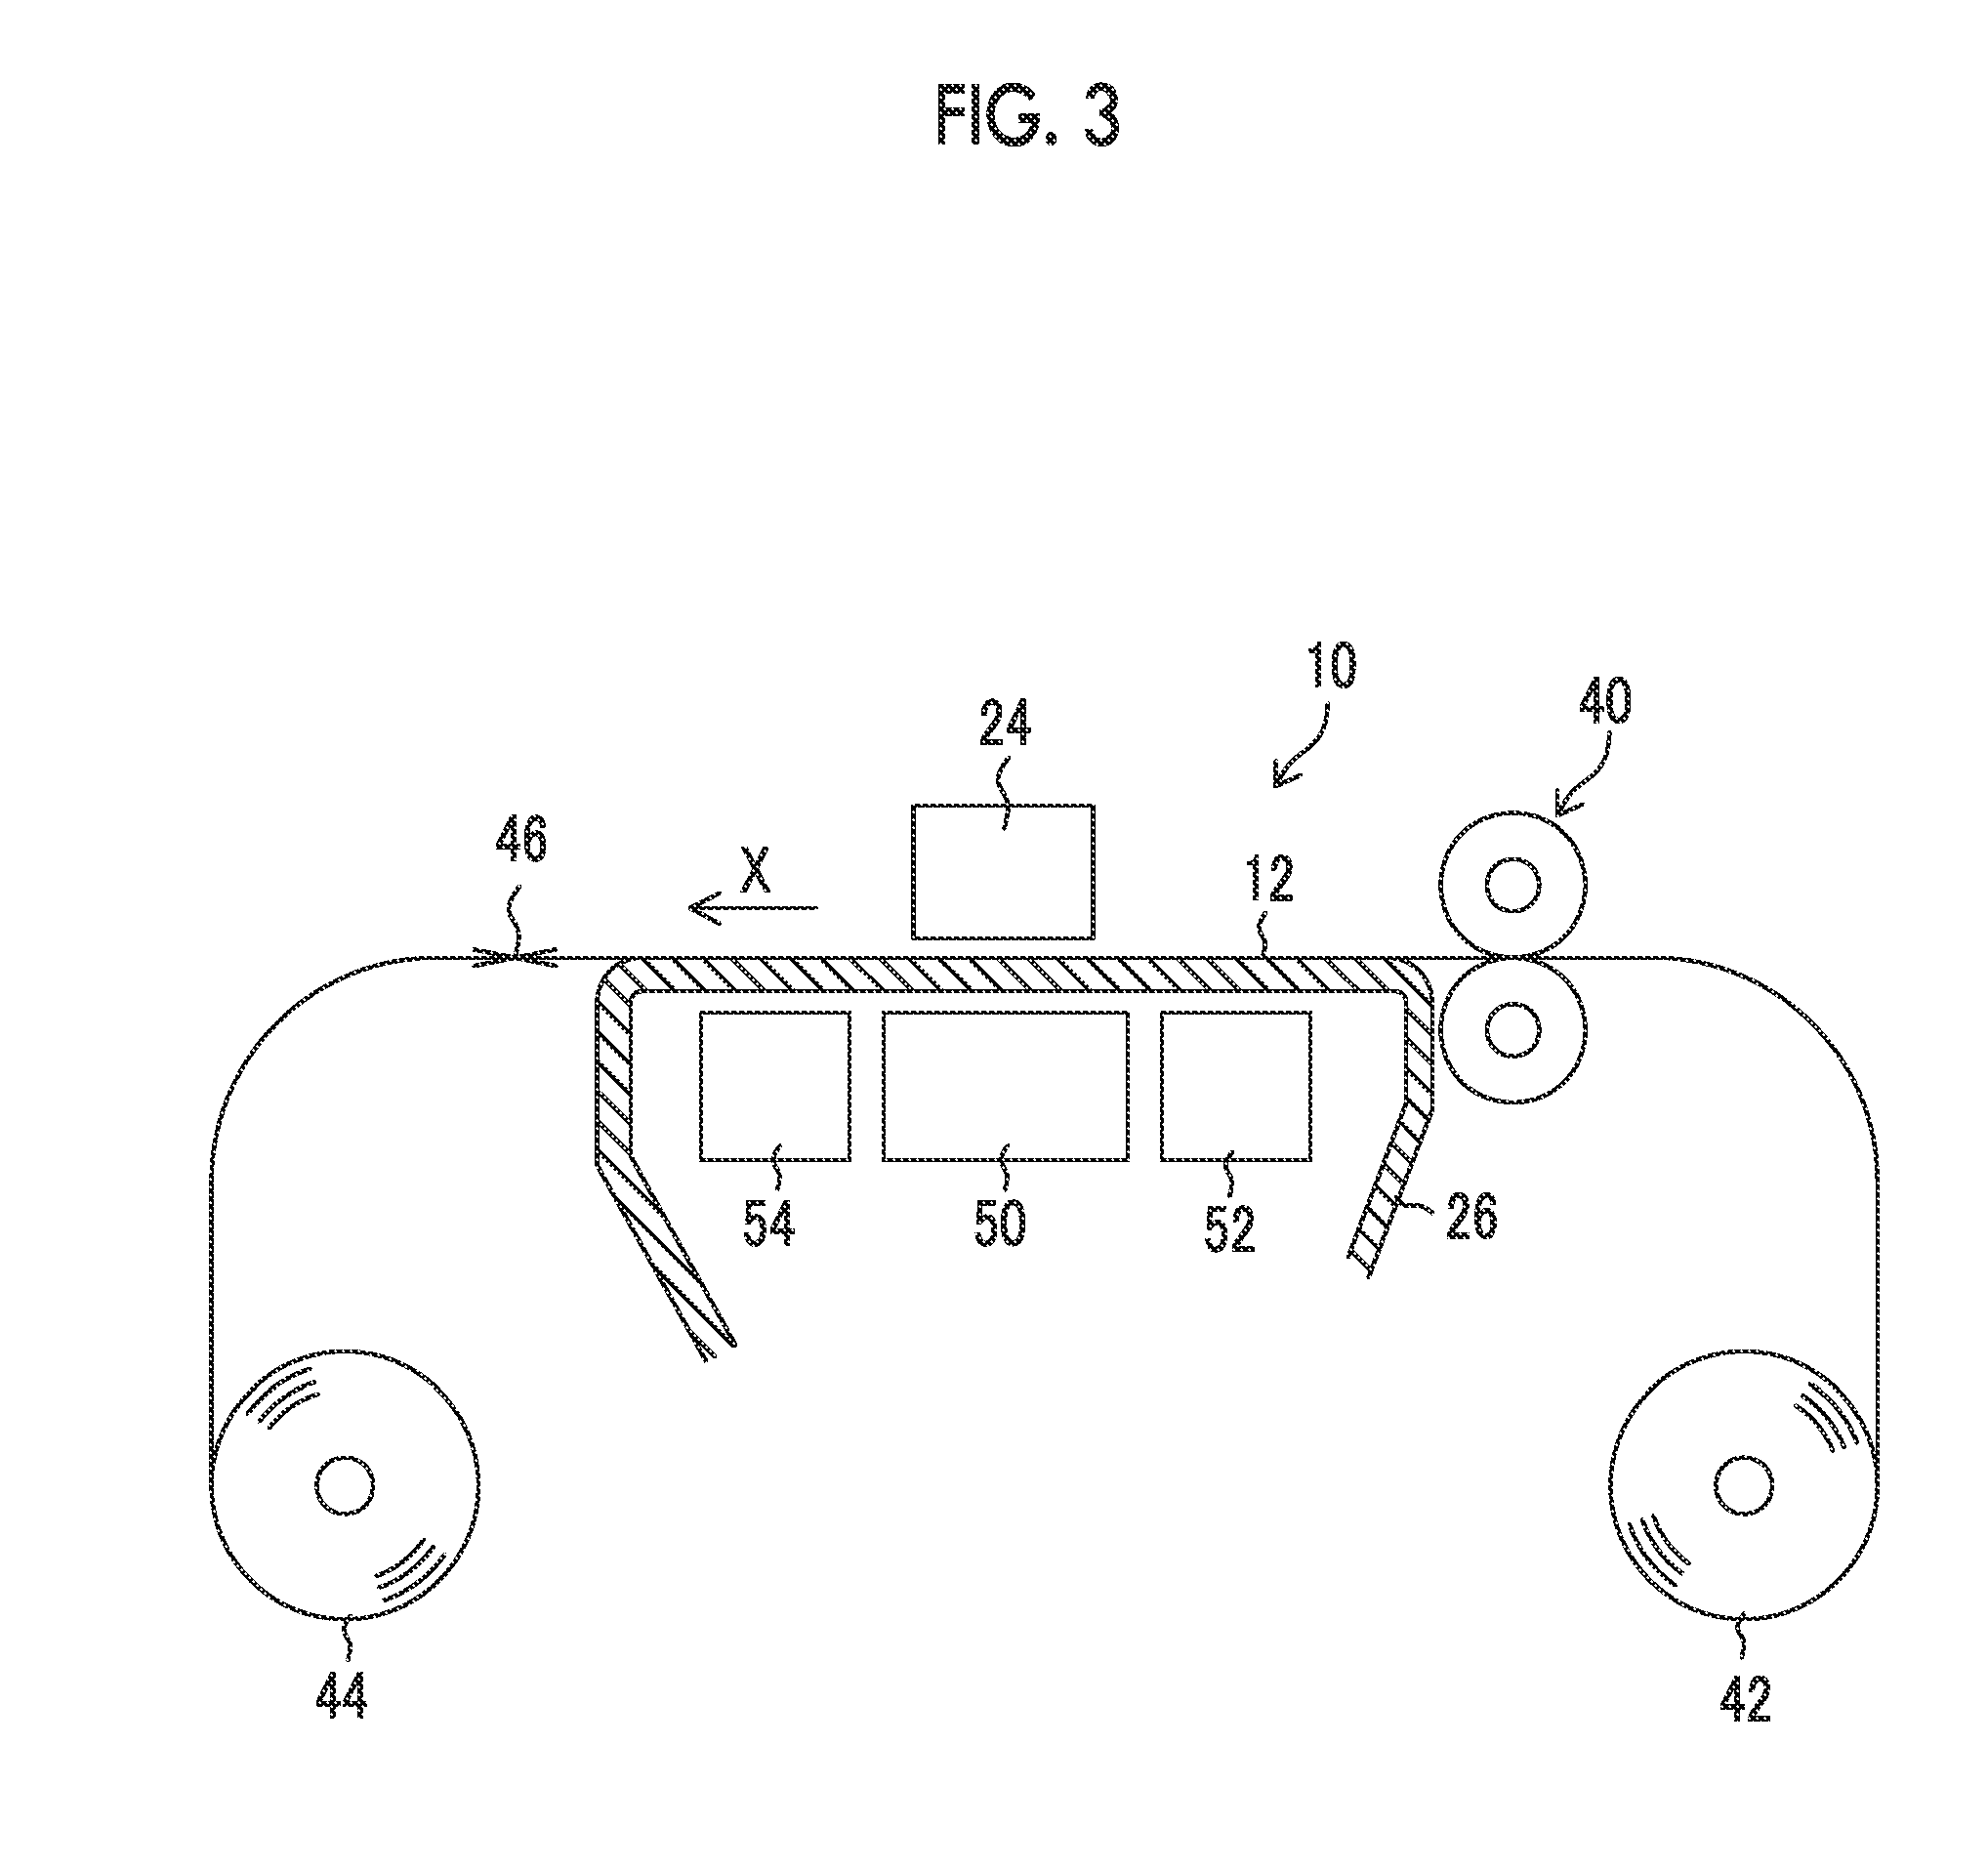 Ink set for forming multilayer, ink jet recording method, and printed material